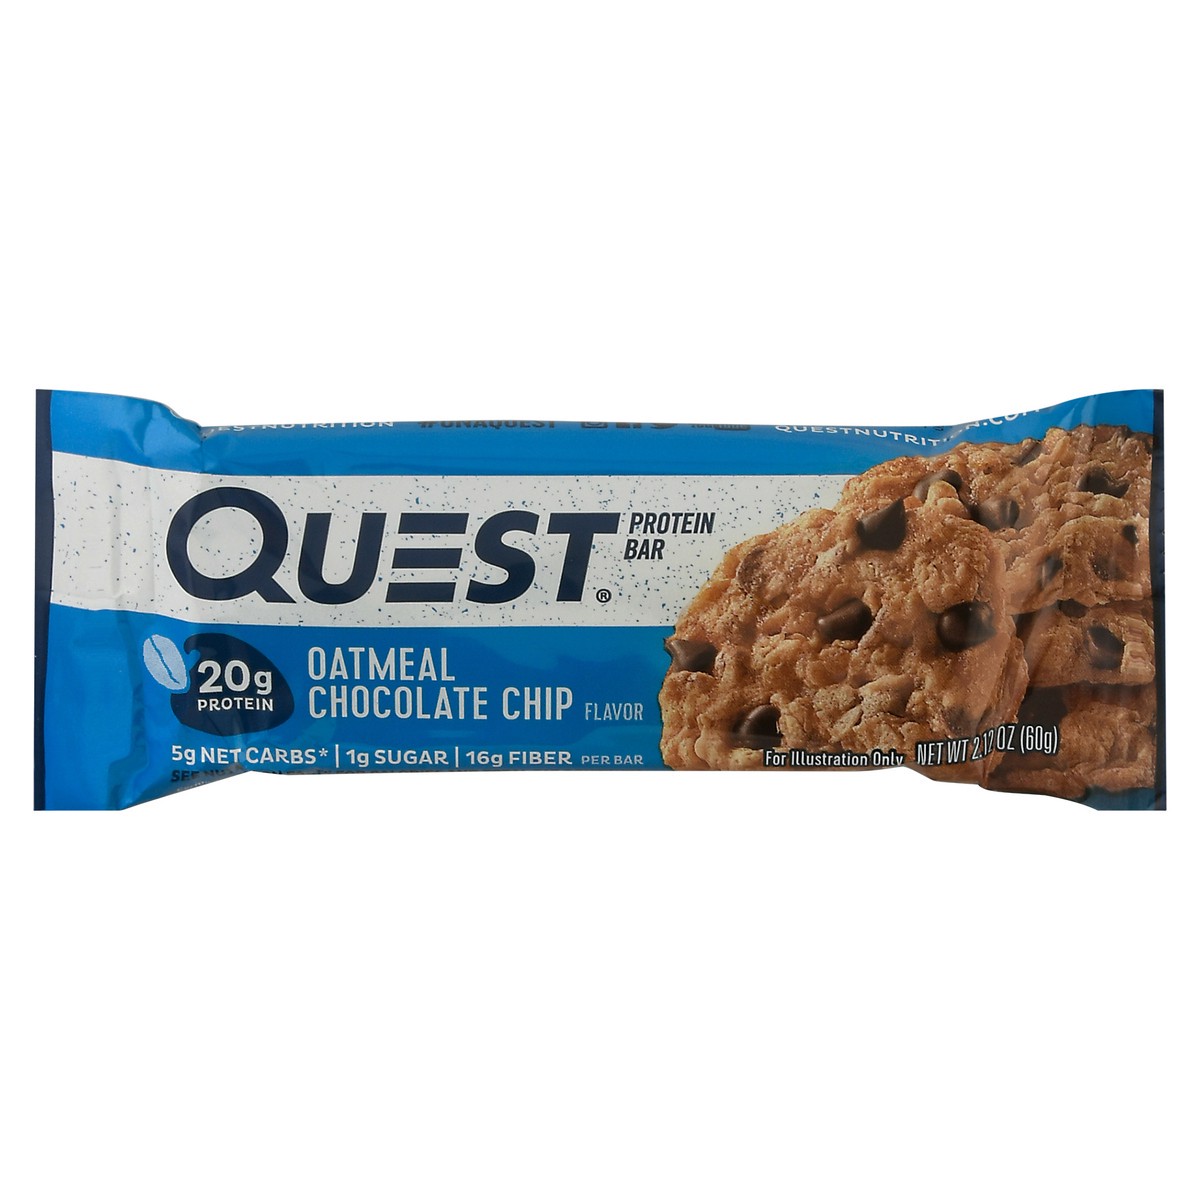 slide 1 of 9, Quest Oatmeal Chocolate Chip Flavor Protein Bar 2.12 oz Bag, 2.12 oz